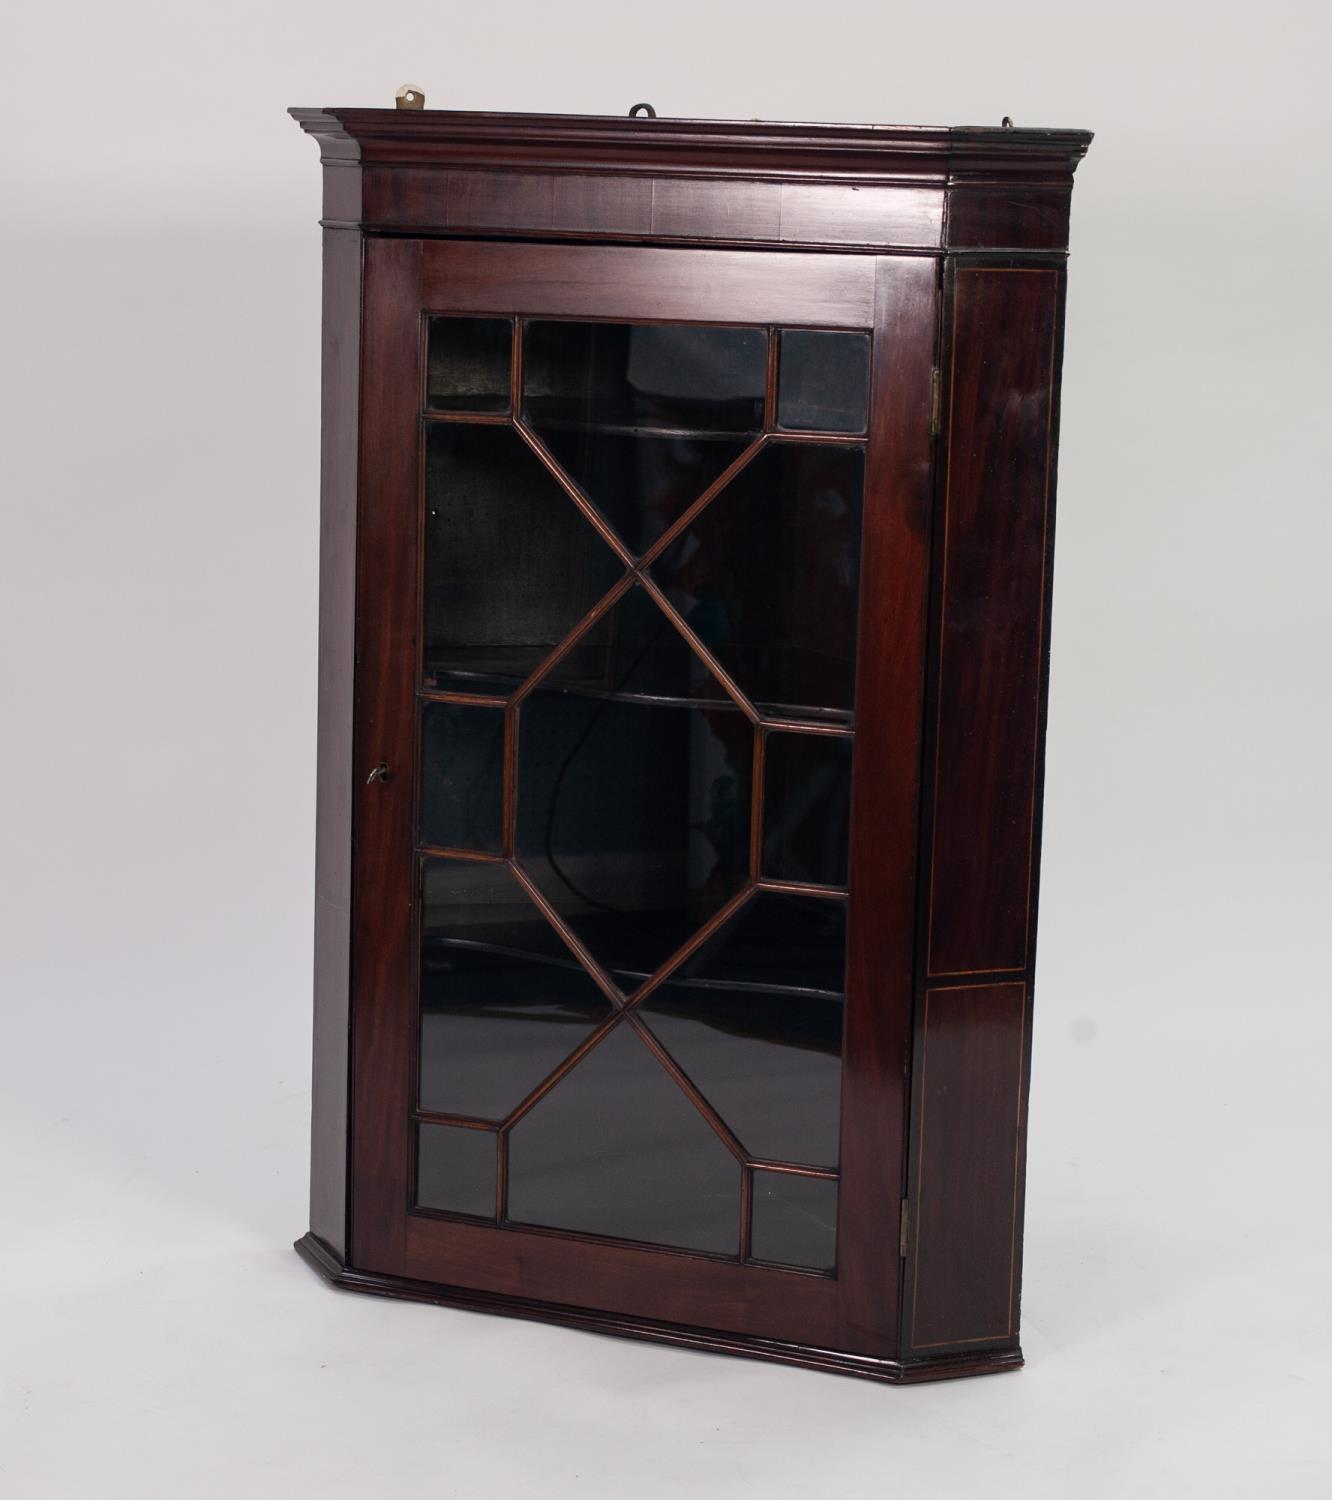 NINETEENTH CENTURY FLAT FRONTED AND GLAZED MAHOGANY CORNER CUPBOARD, of typical form with thirteen